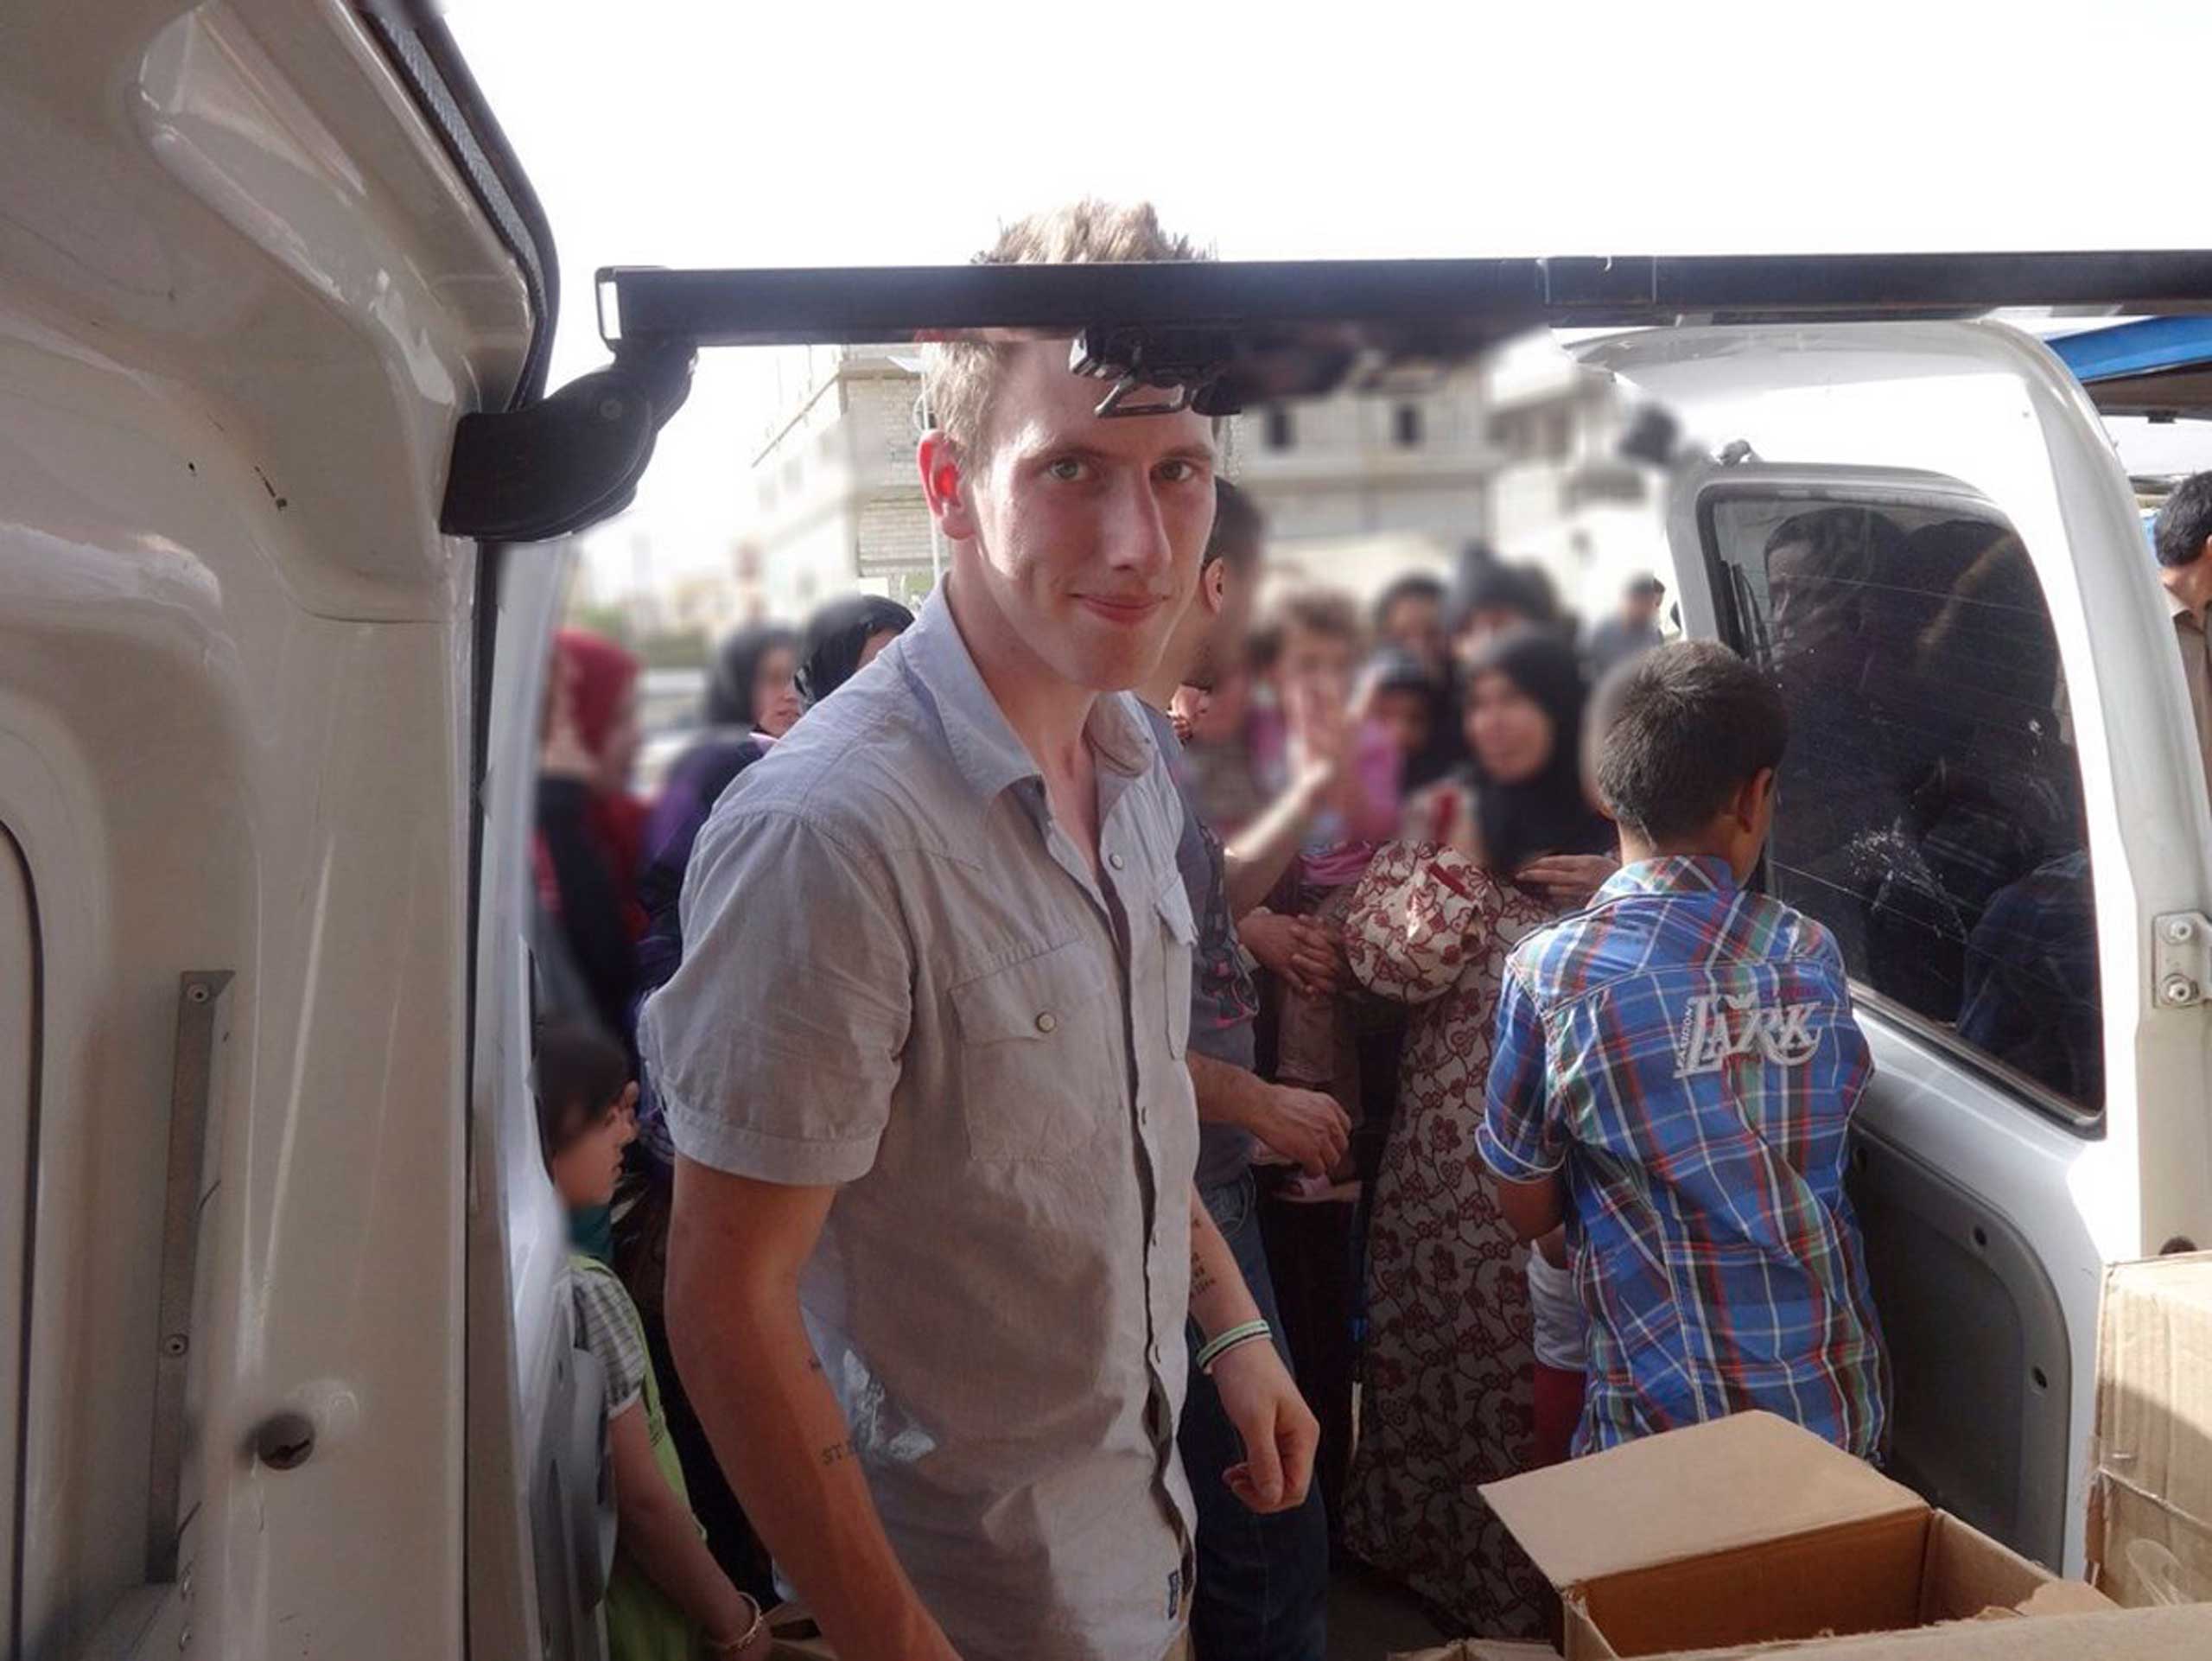 Abdul-Rahman (Peter) Kassig is pictured making a food delivery to refugees in Lebanonís Bekaa Valley in this May 2013 handout photo. (Reuters)